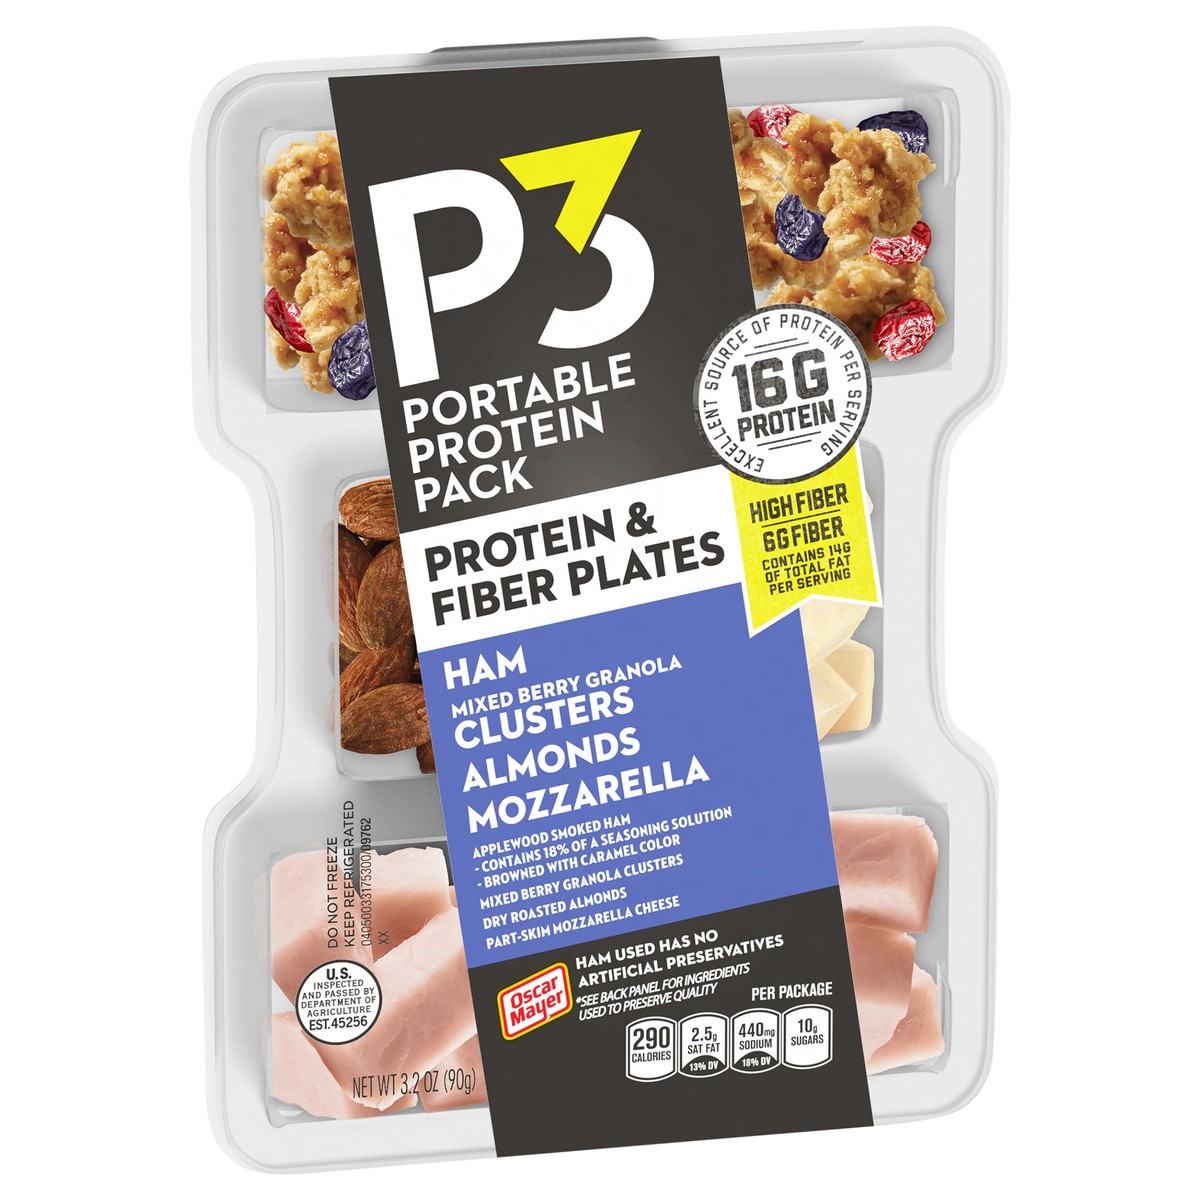 slide 11 of 13, P3 Portable Protein Snack Pack & Fiber Plate with Ham, Mixed Berry Granola Clusters, Almonds & Mozzarella Cheese, 3.2 oz Tray, 3.2 oz